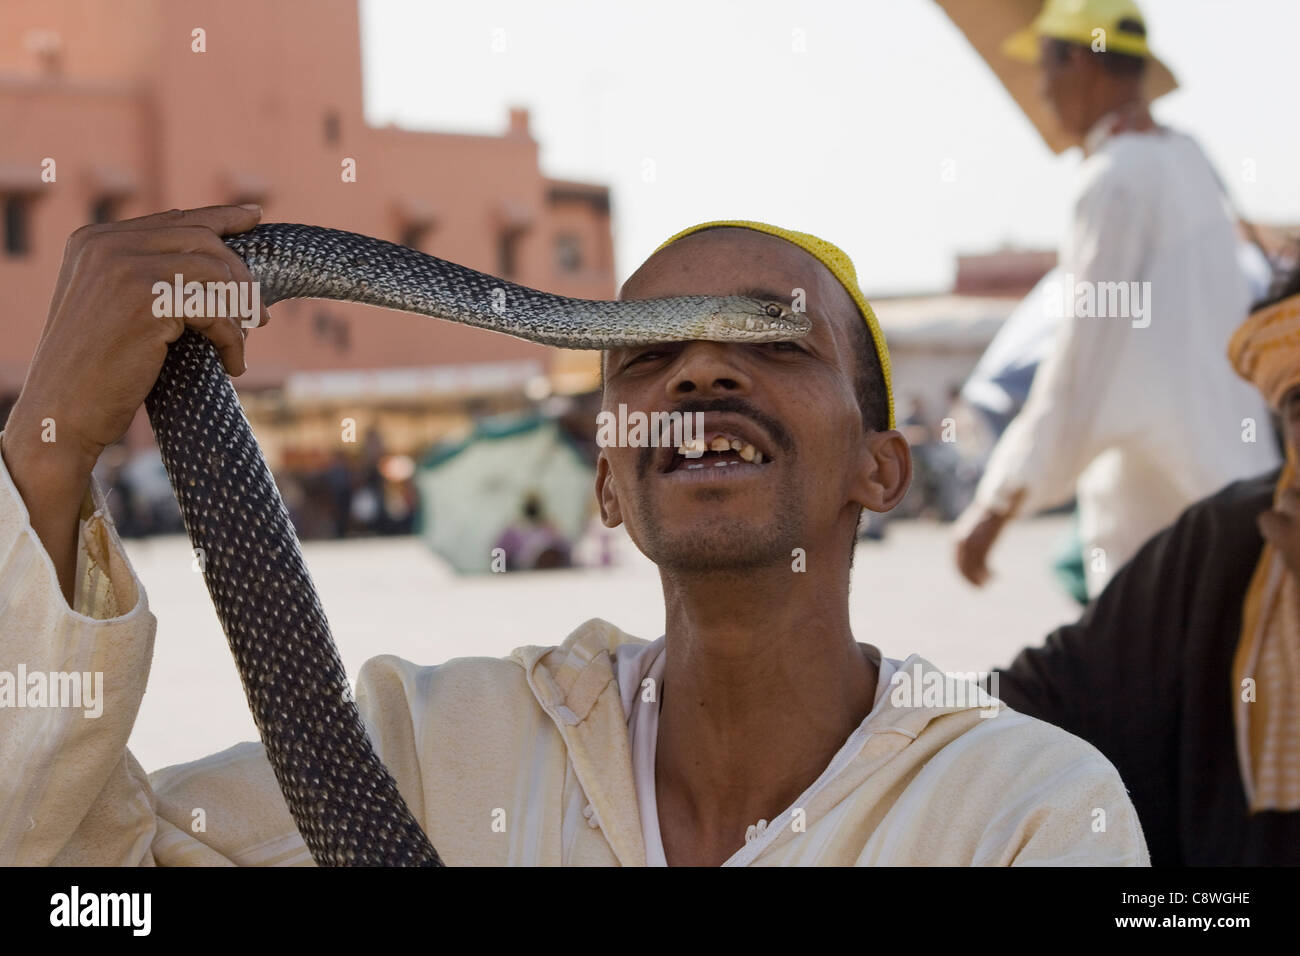 A Snake Charmer in Marrakech Morocco entertaining tourists at the main square Jamaa el Fna. Stock Photo